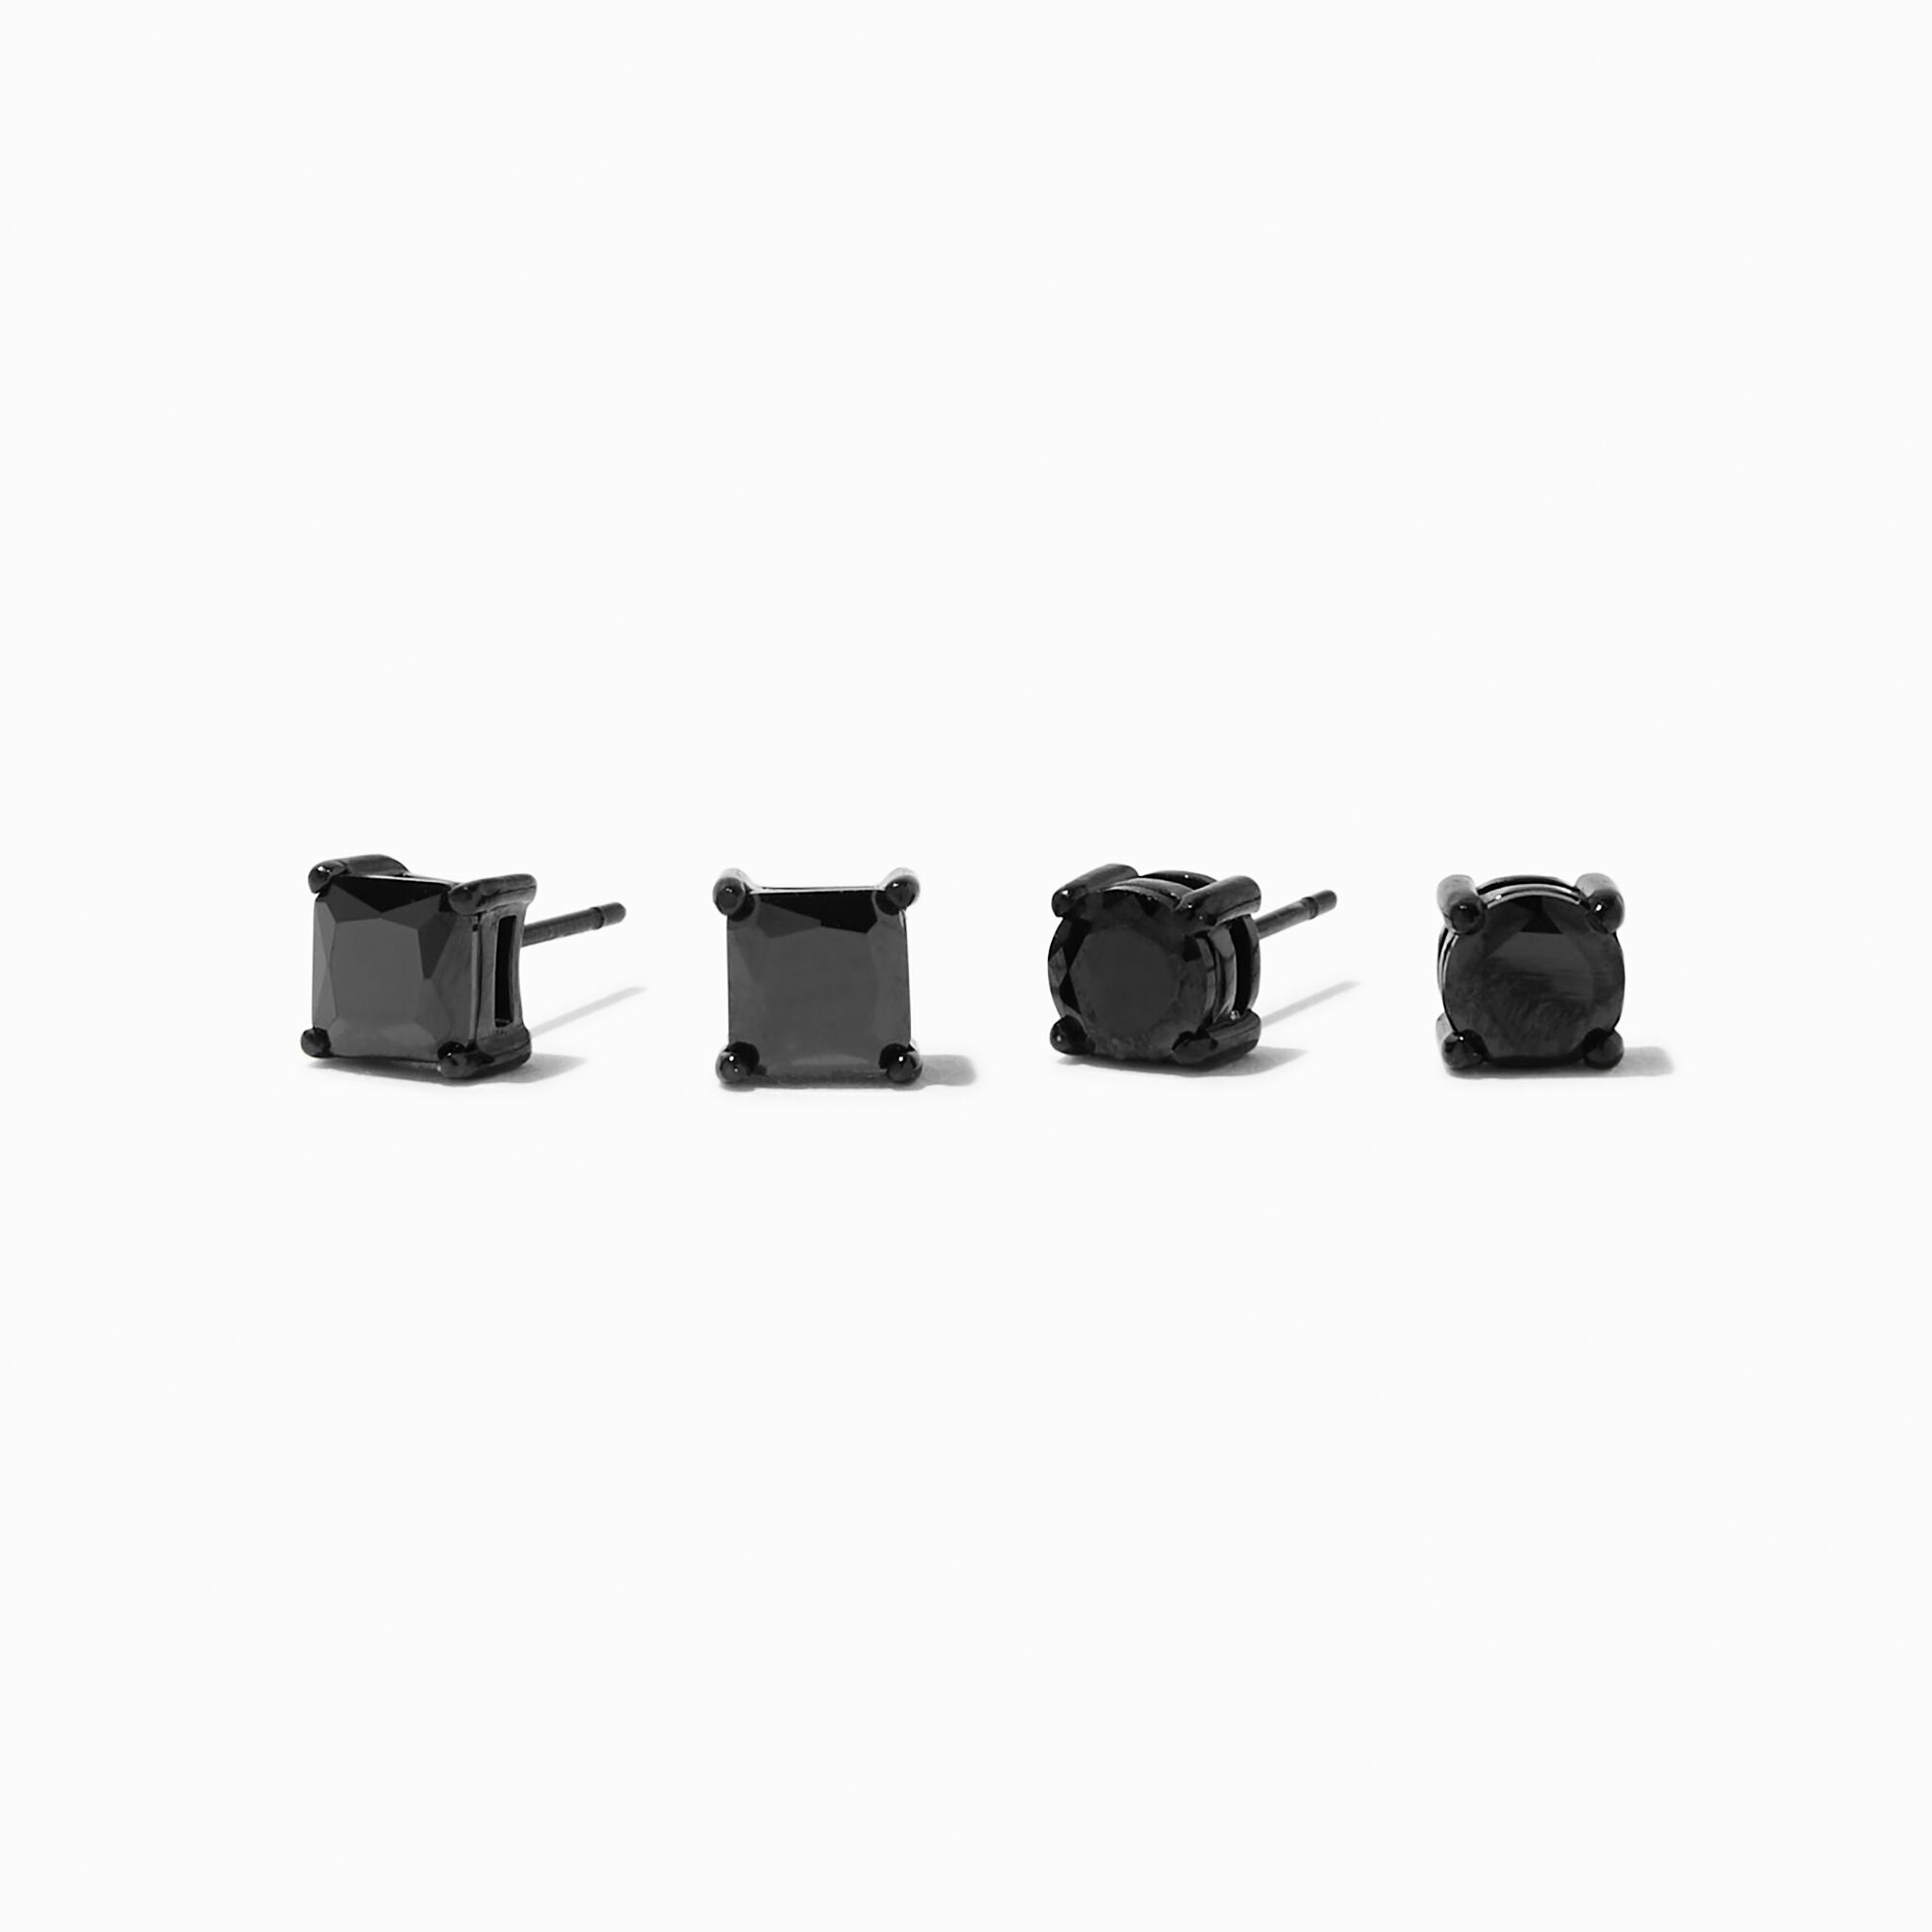 View Claires Stainless Steel Cubic Zirconia 6MM Square Round Stud Earrings 2 Pack Black information